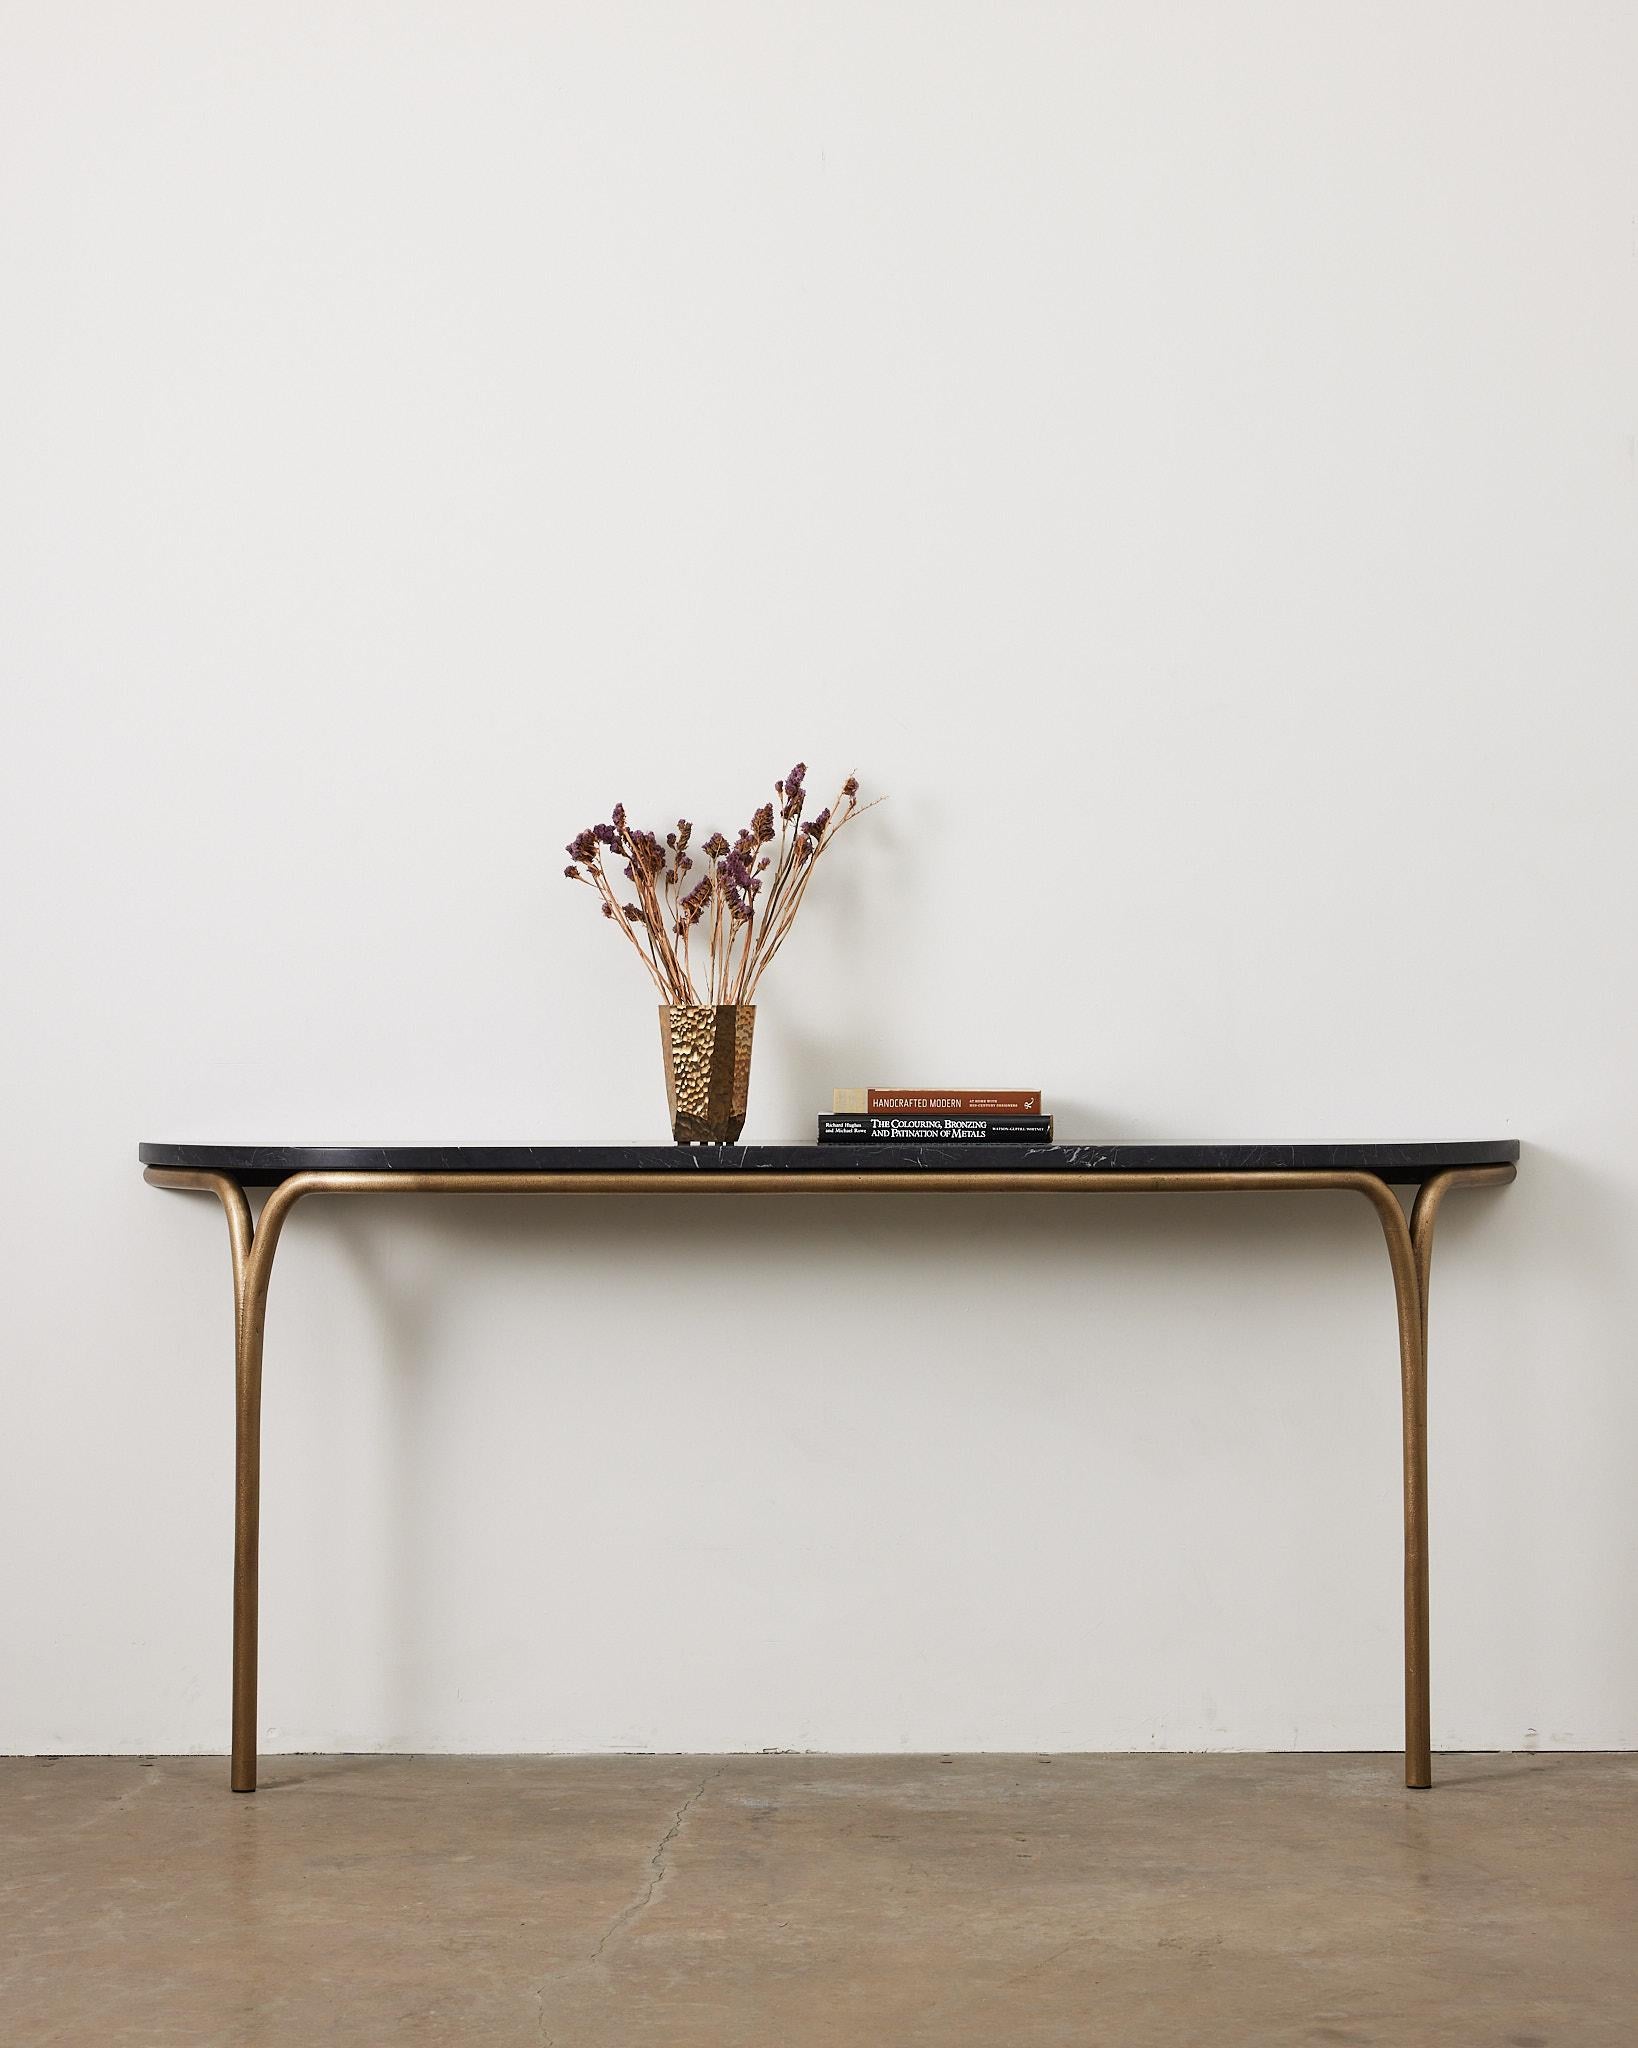 The Cirrus Console Table juxtaposes structural solidity with lightness of form. The graceful leg shape creates an aperture as it meets the mass of the tabletop, the negative space highlighting the distinct qualities of each material. Hand-sculpted